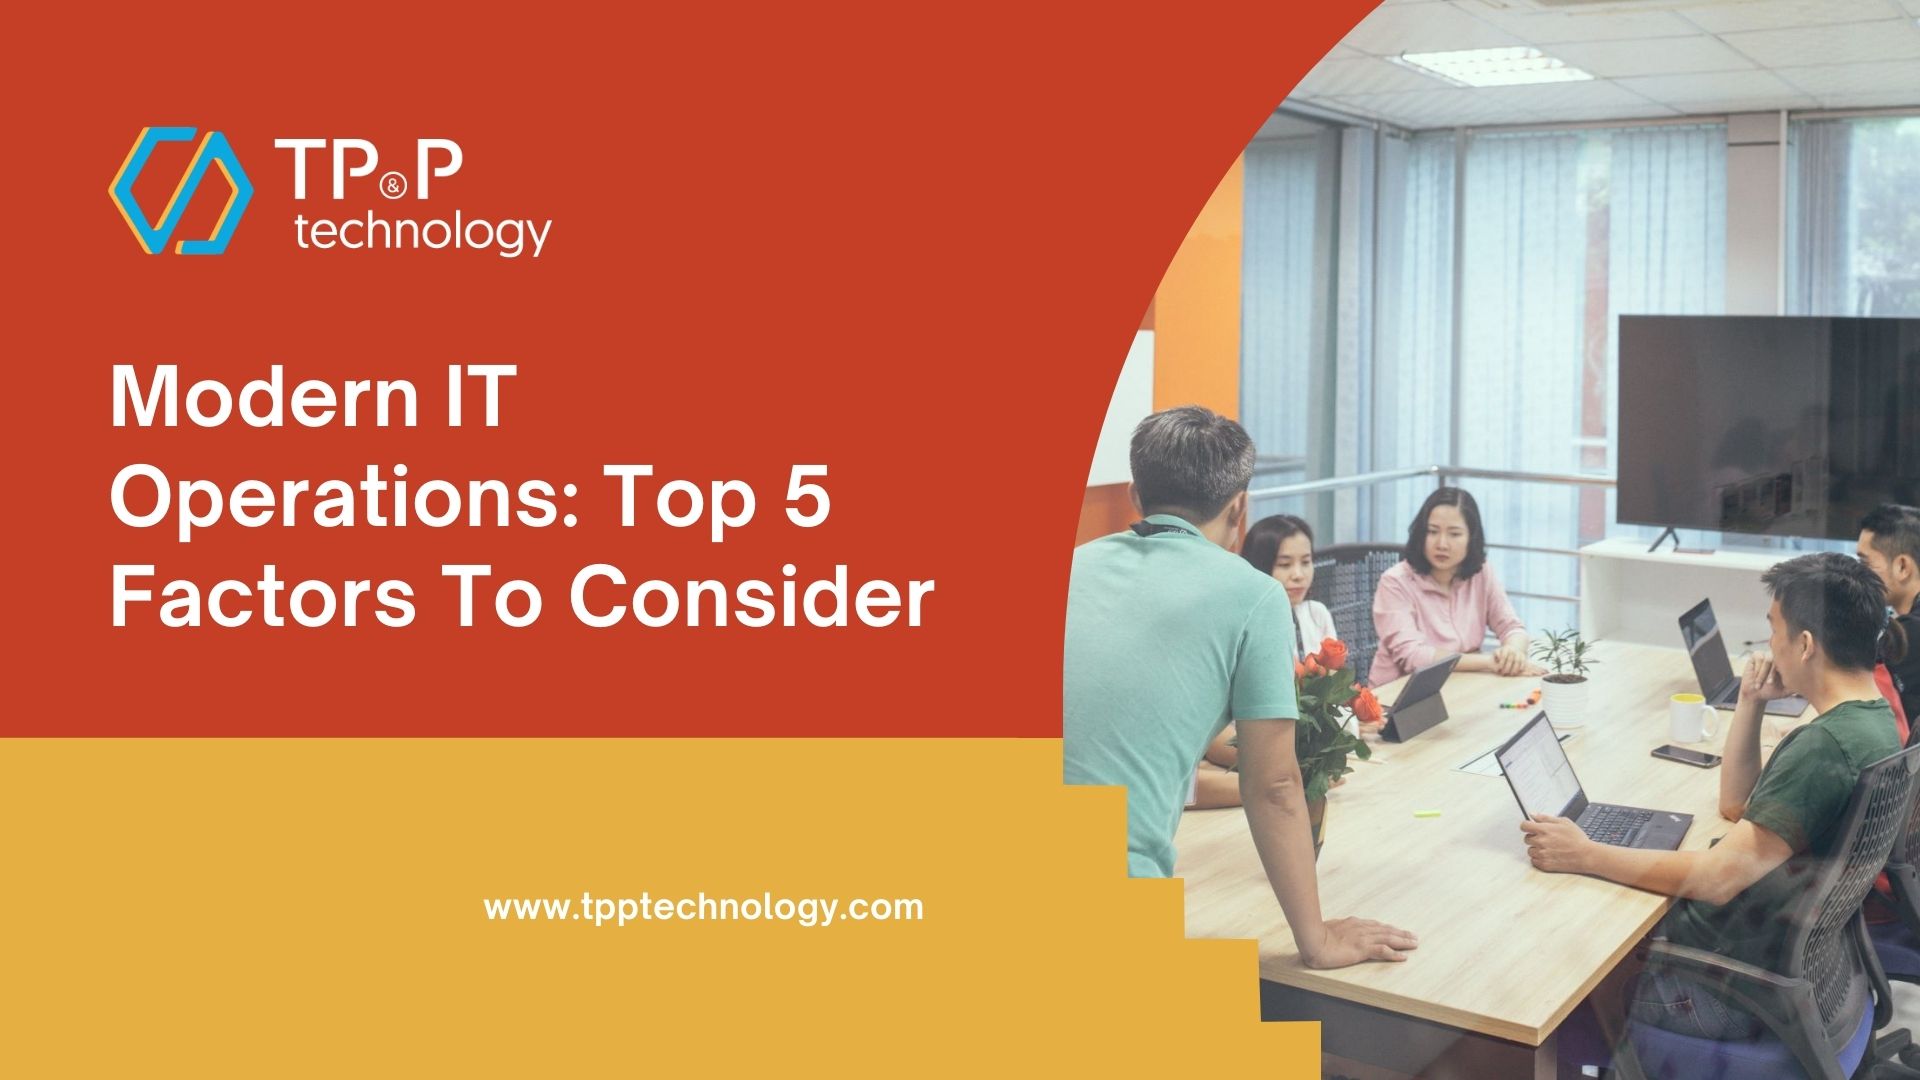 Modern IT Operations: Top 5 Factors To Consider